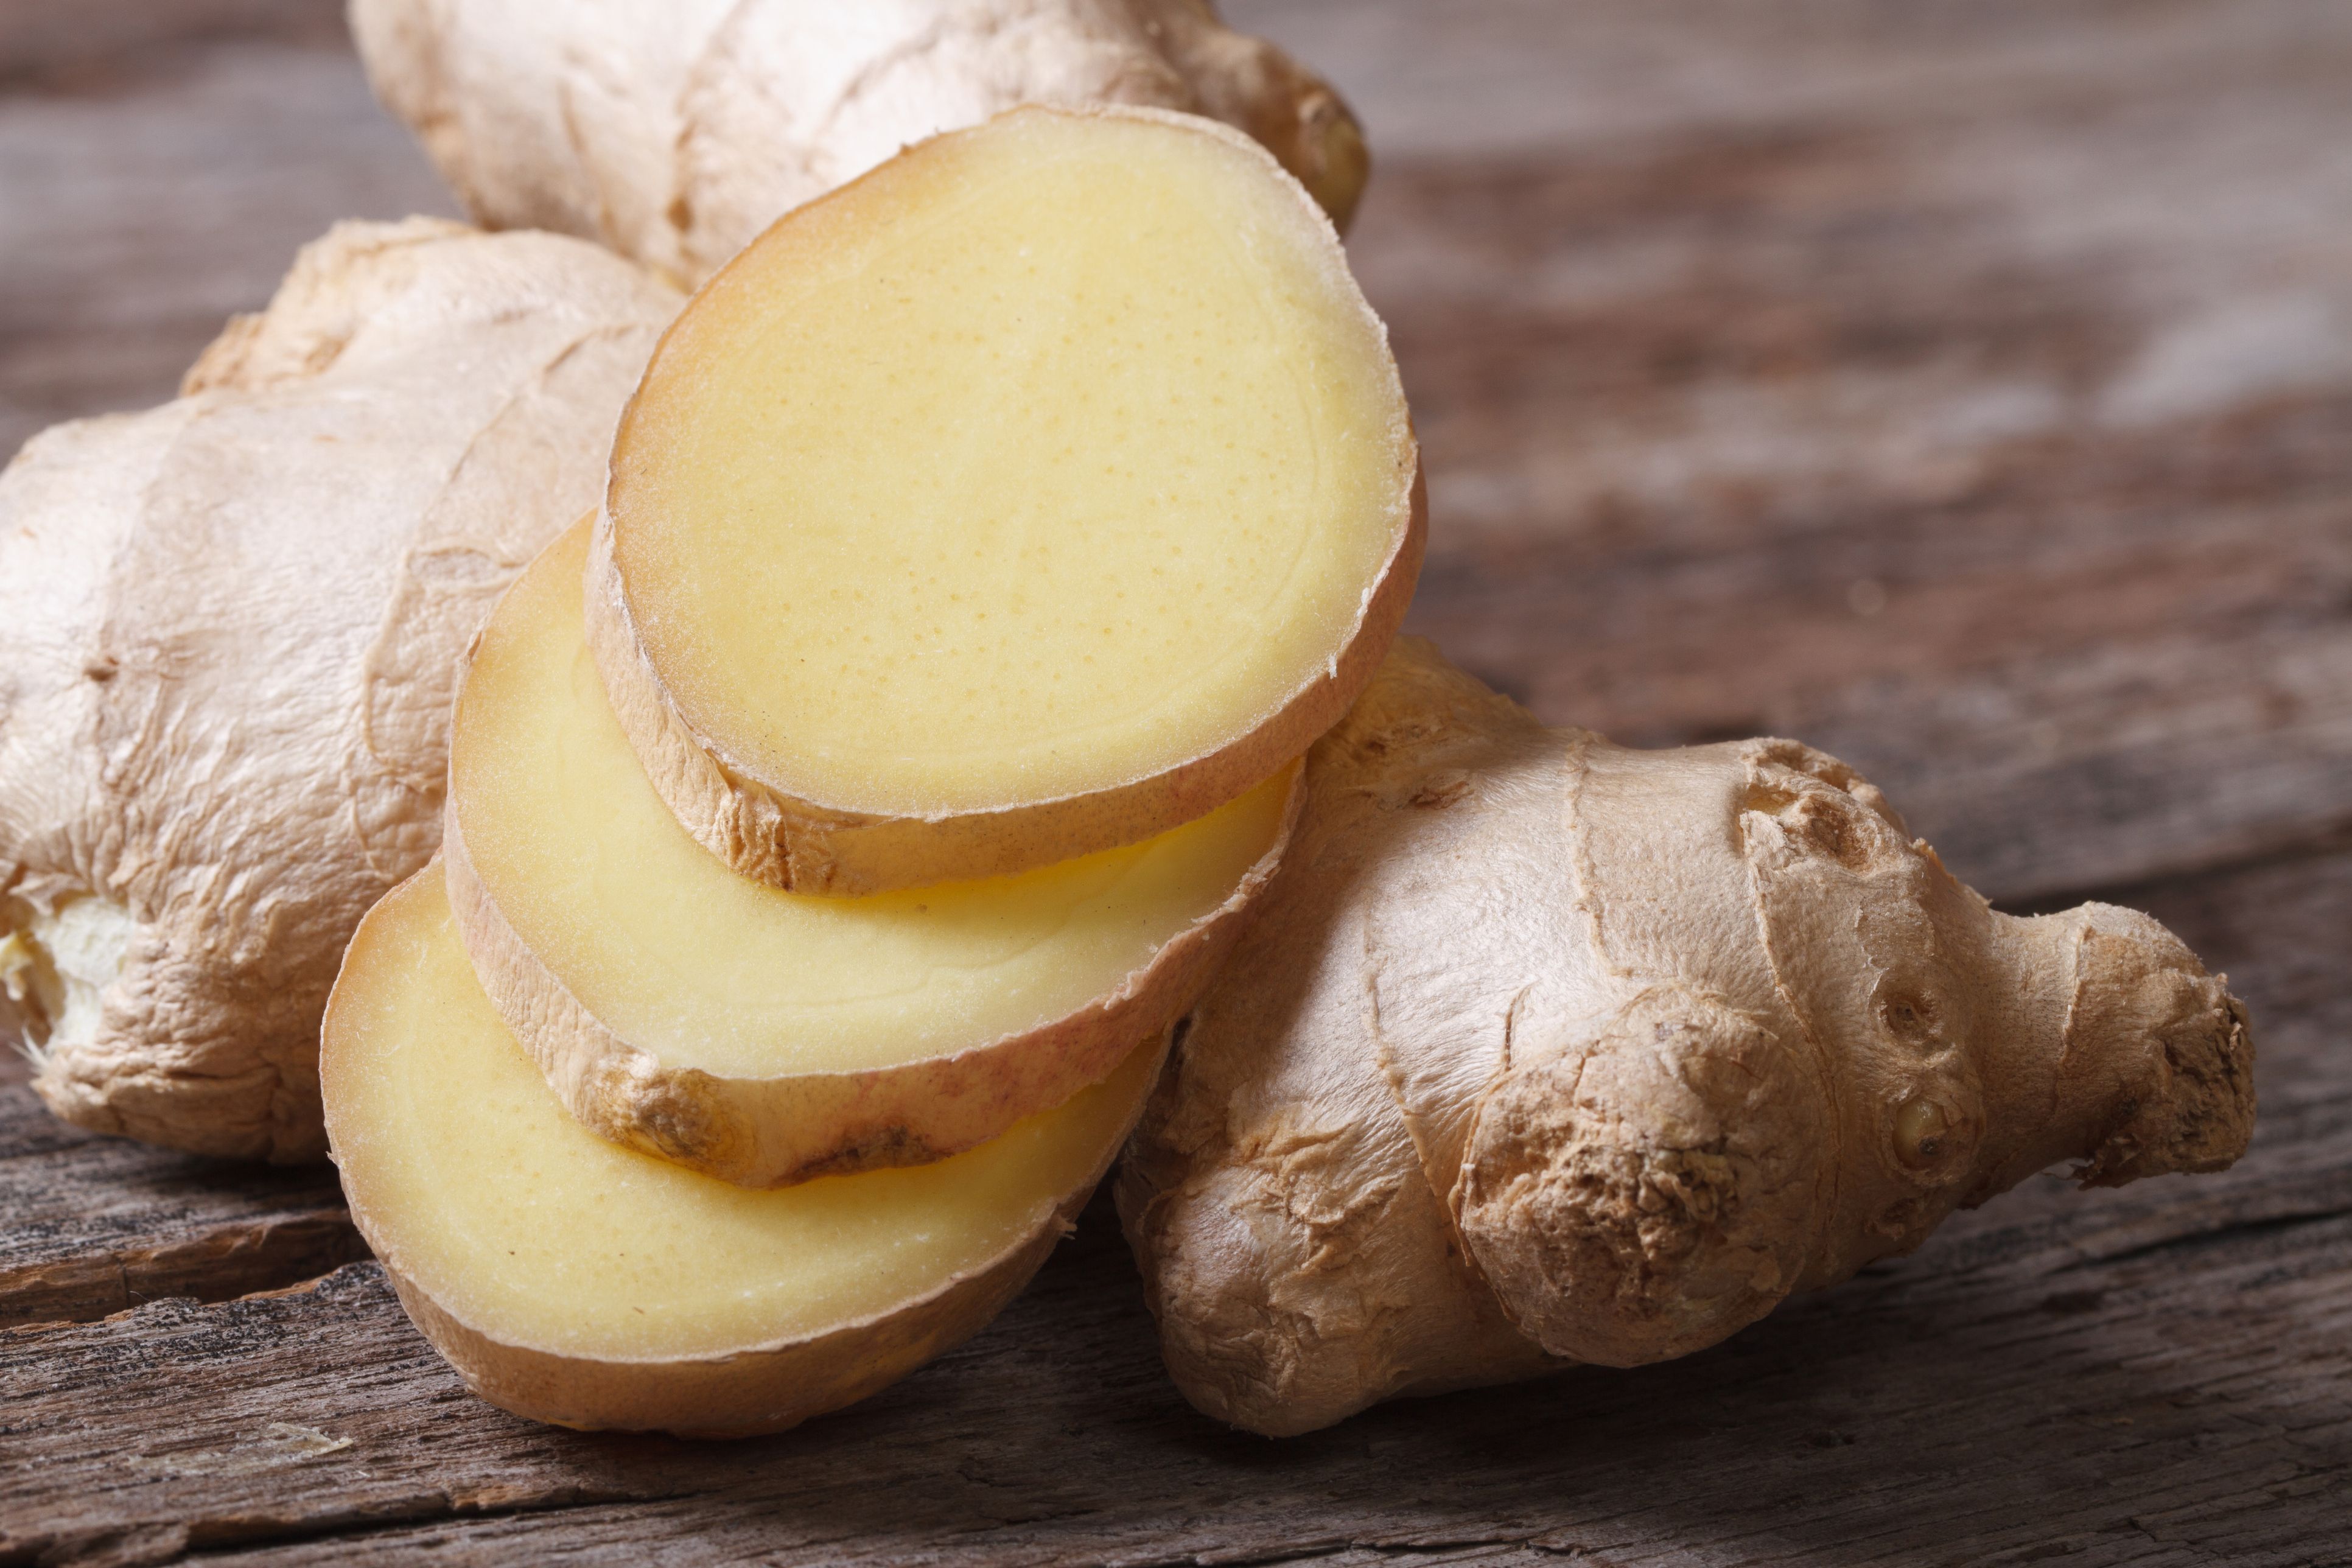 9 Health Benefits of Ginger - Uses for Fresh and Dried Ginger